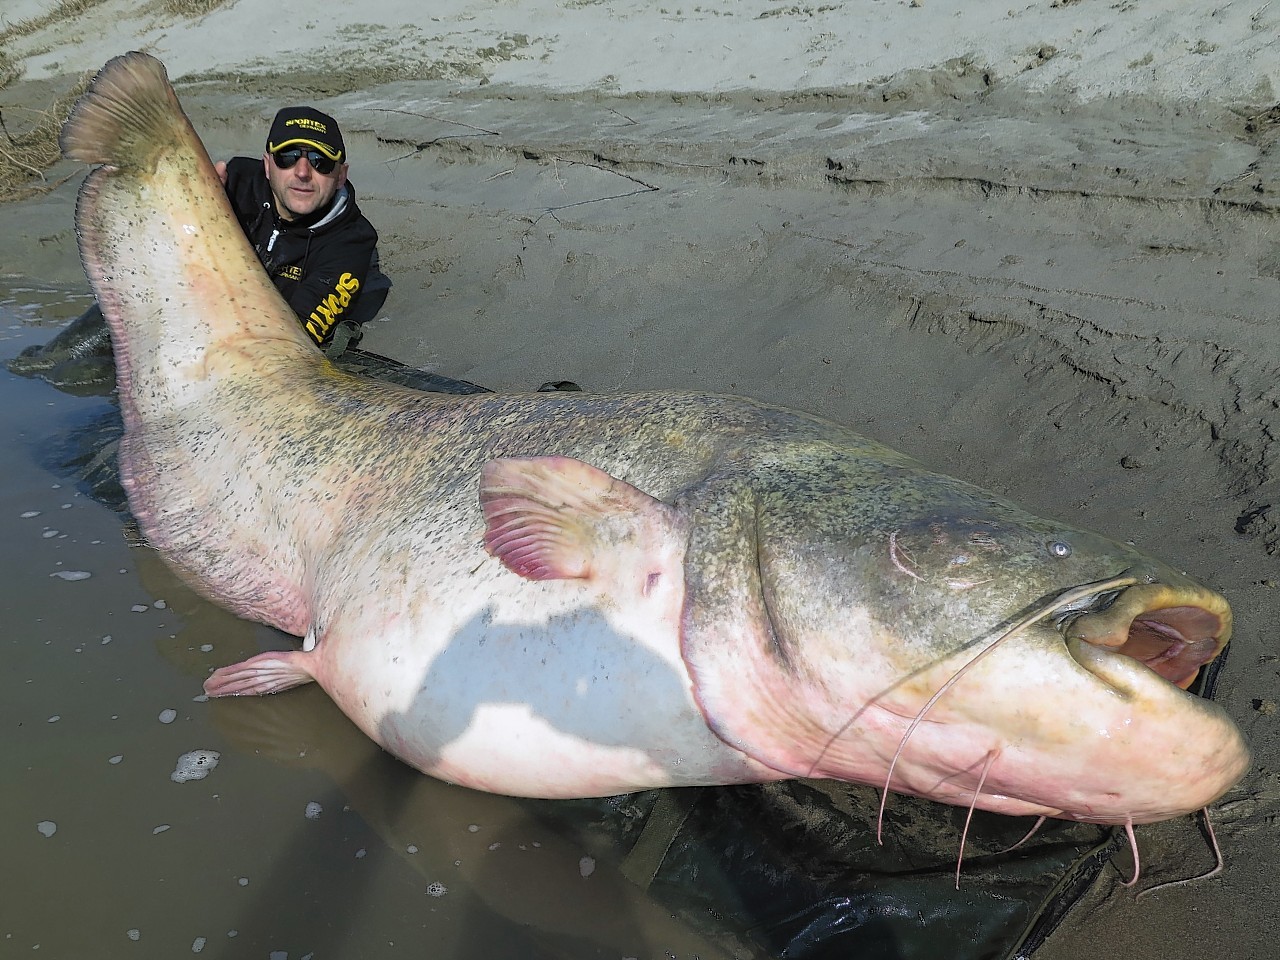 Italian fisherman Dino Ferrari poses for a picture with an 8ft 10in long catfish caught in the Po River in the outskirts of Mantova, some 160 km (99 miles) SE of Milan, northern Italy.